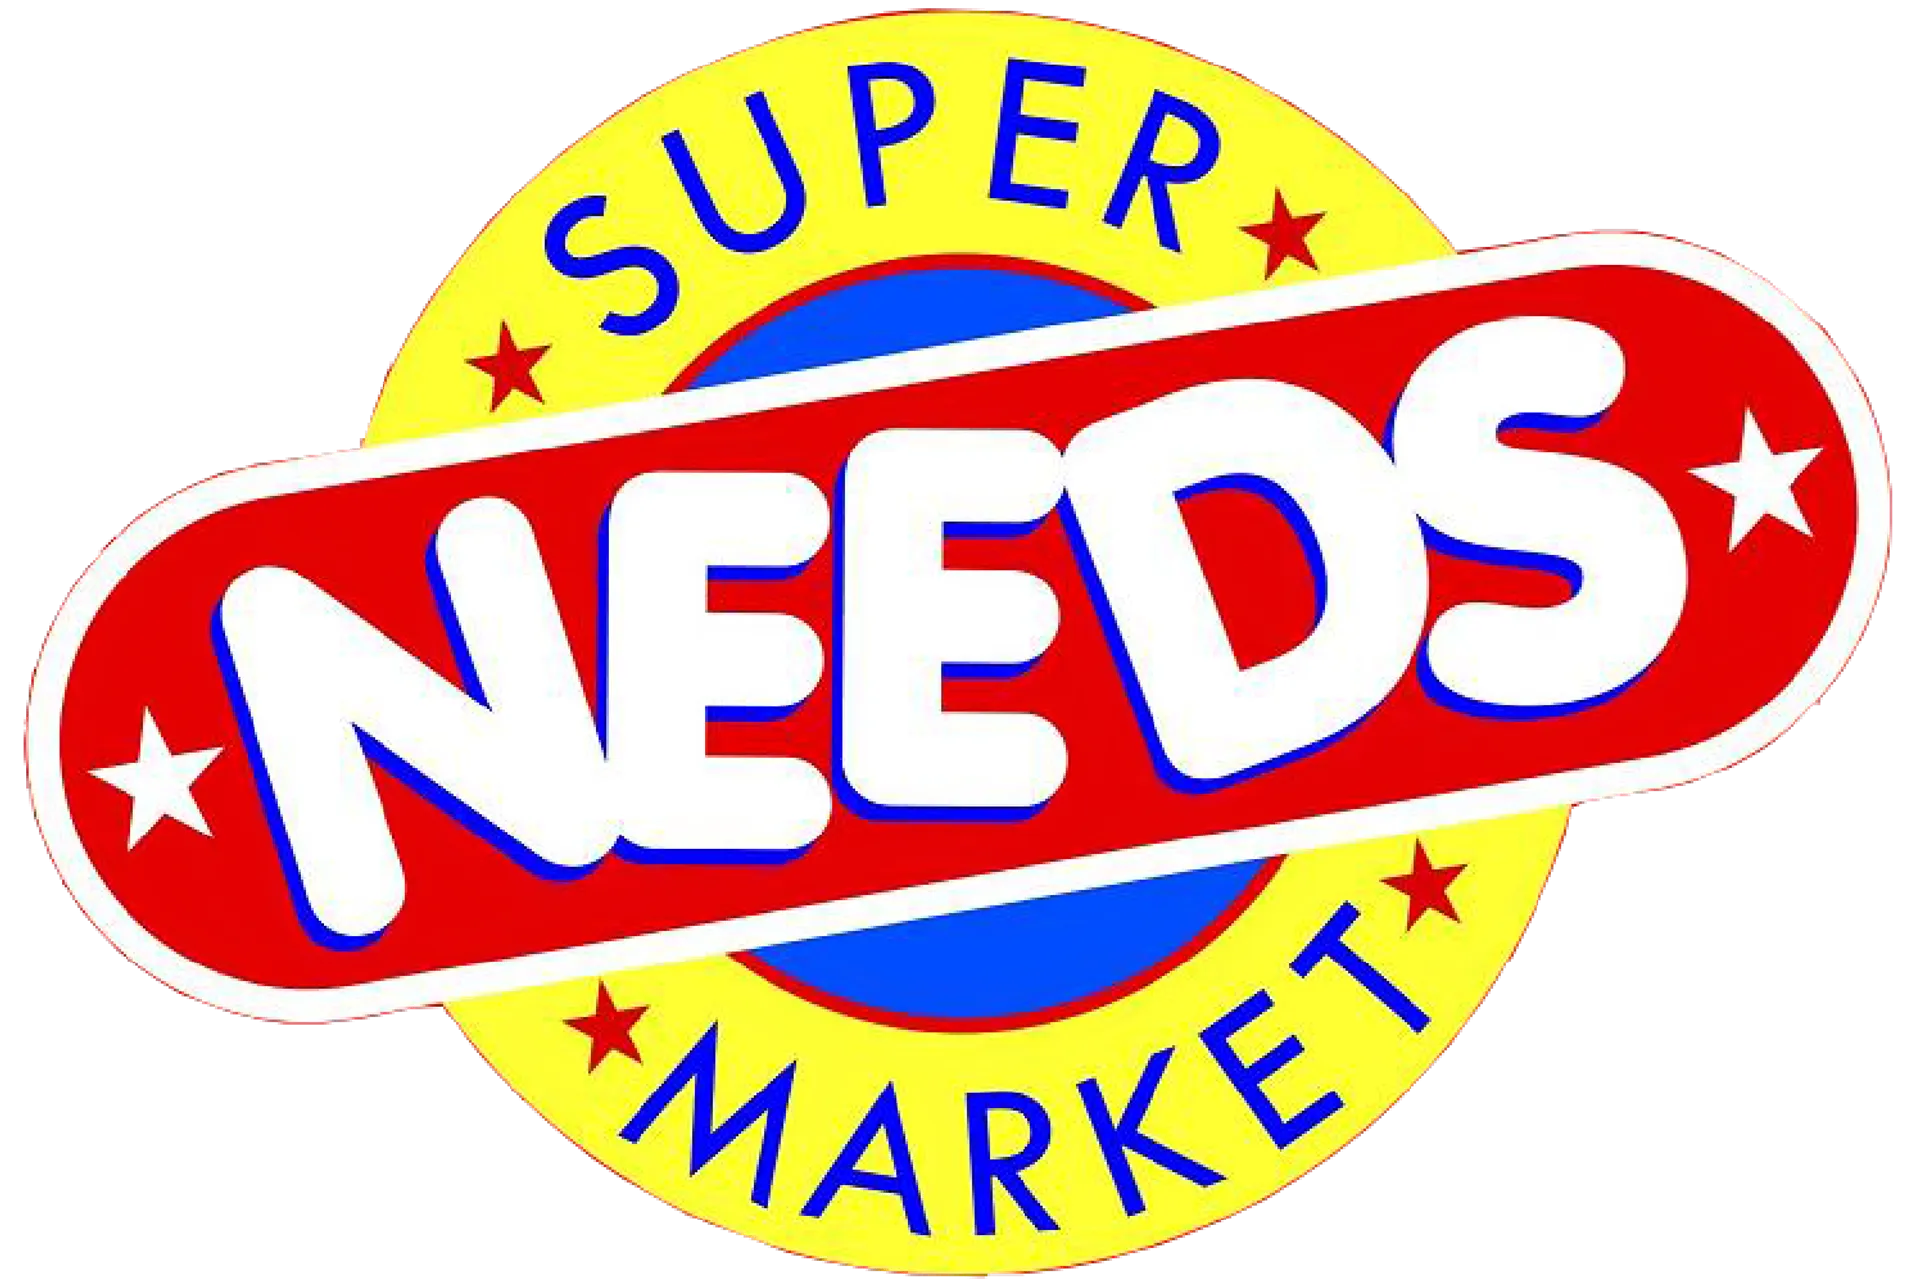 NEED SUPERMARKET logo. Current weekly ad